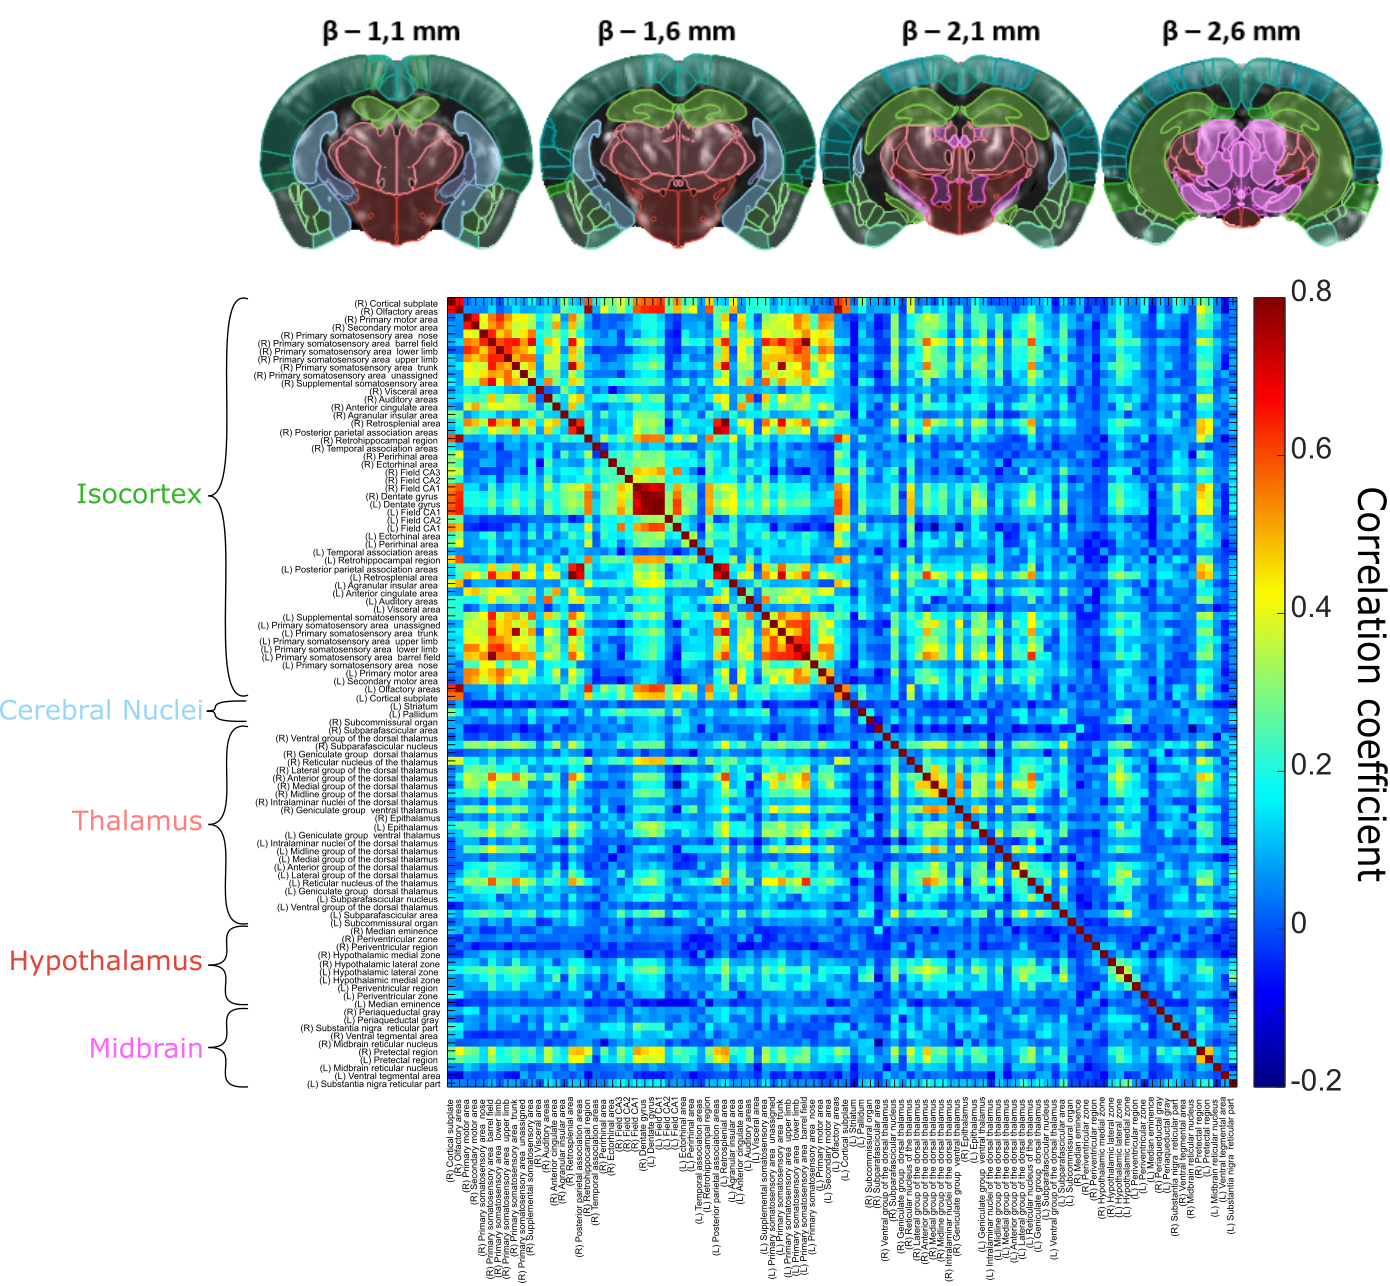 This 3D connectivity matrix for a mouse model was acquired non-invasively in 20 minutes, and shows strong interhemispheric connectivity patterns between four slices, with correlation coefficients up to 0.8. Reproduced from Bertolo et al., Journal of Visualized Experiments, 2021